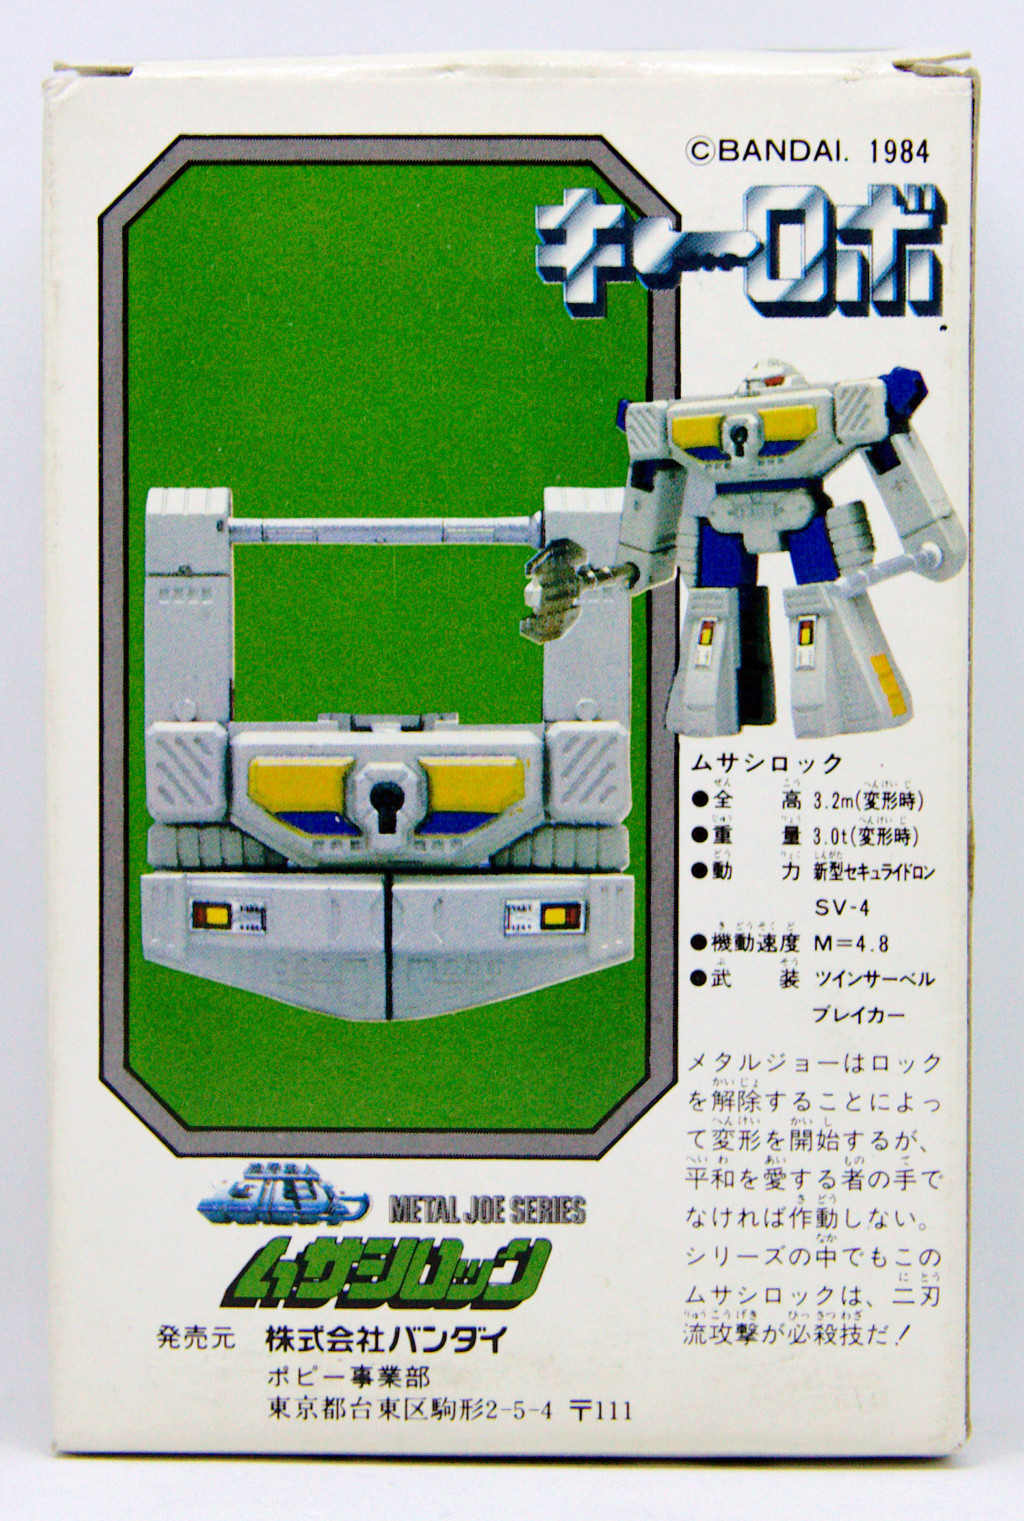 Pilgrim's collection (Gobots, Transformers...) - Page 23 Mj-06_11